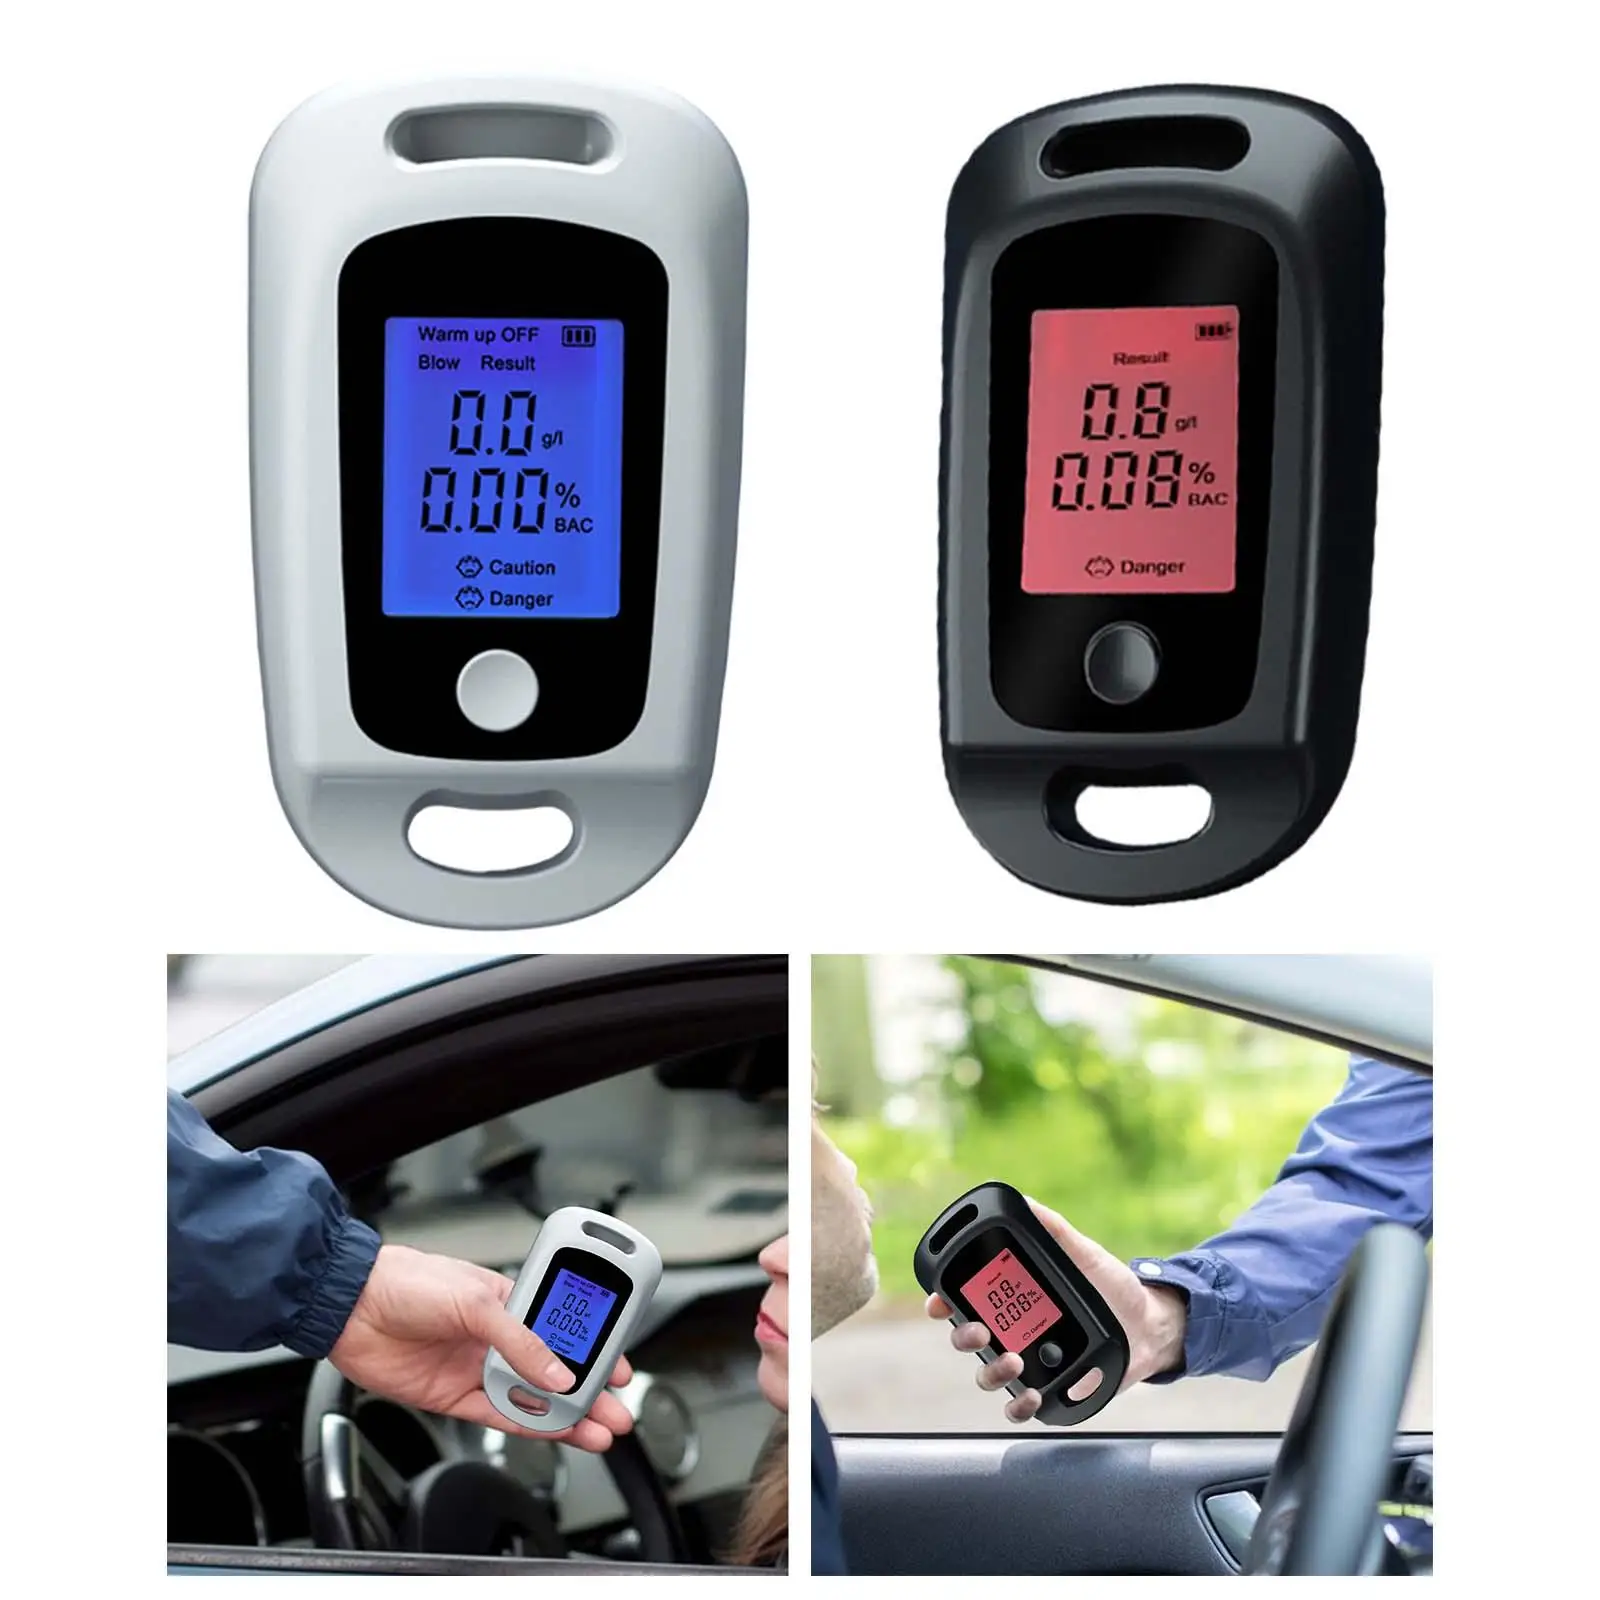 Alcohol Tester LCD Display Screen Digital Mini Air Blowing High Accuracy Breath Drunk Driving Analyzer for Personal Drivers